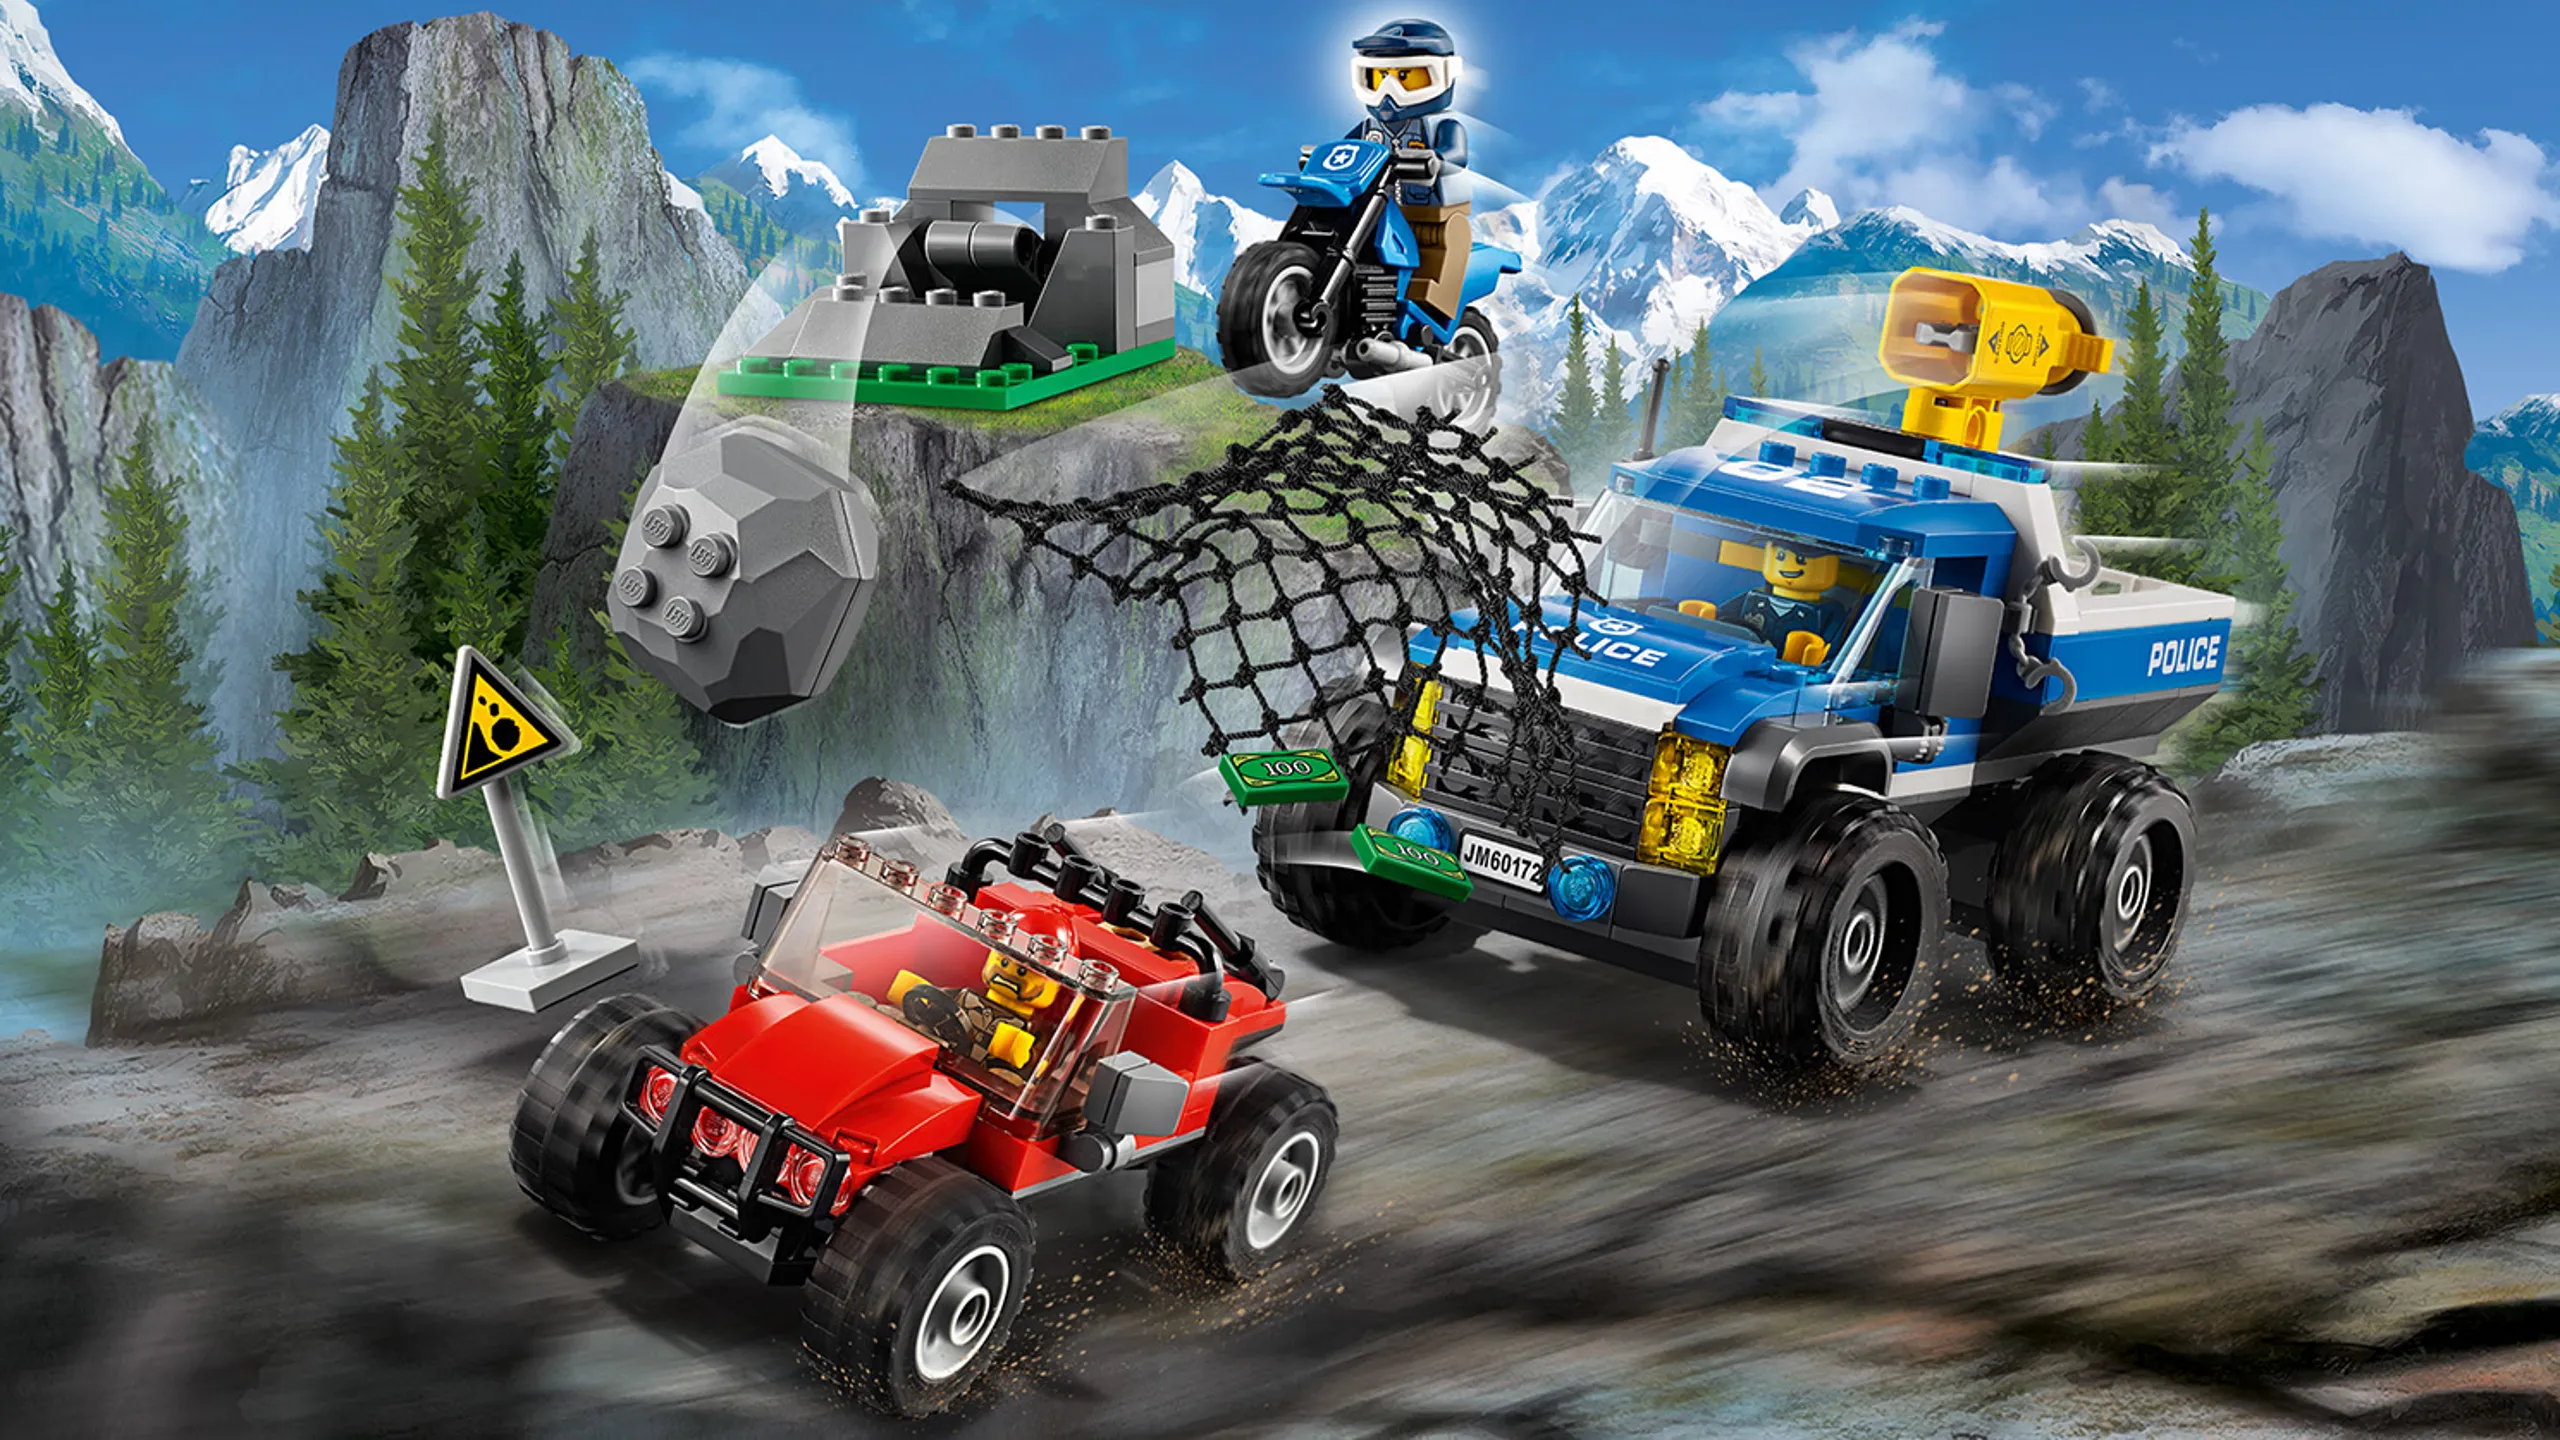 LEGO City Mountain Police - 60172 Dirt Road Pursuit - The police drops a huge net from the air to catch a crook trying to escape.